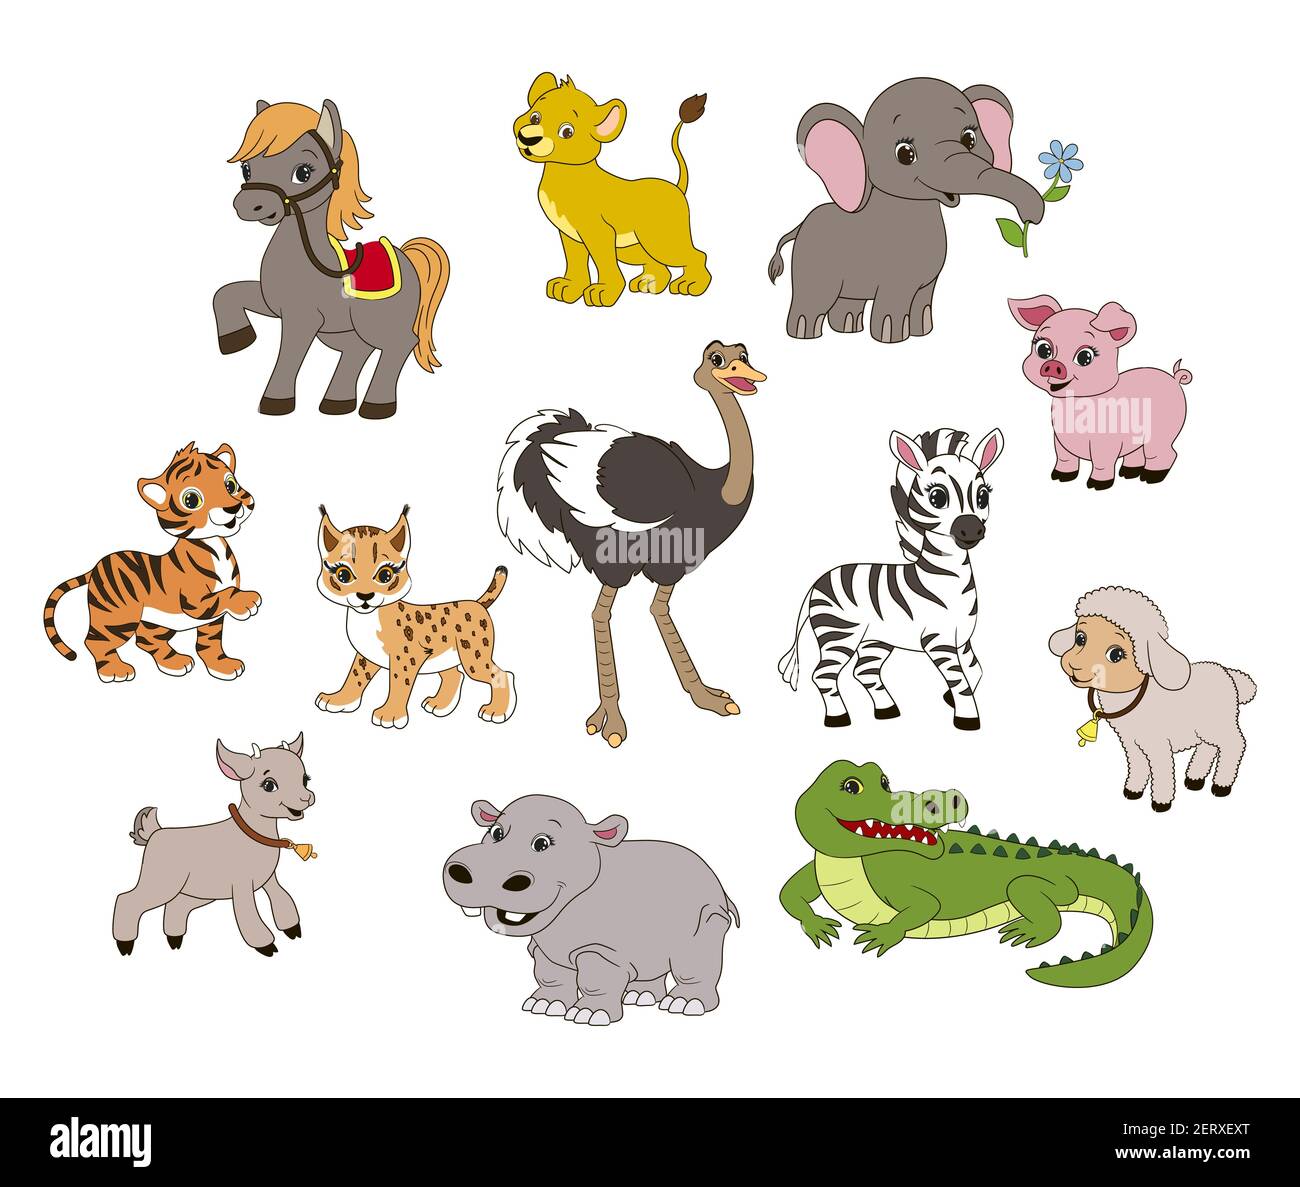 set of isolated animal characters for children's games and books, vector illustration in cartoon style Stock Vector